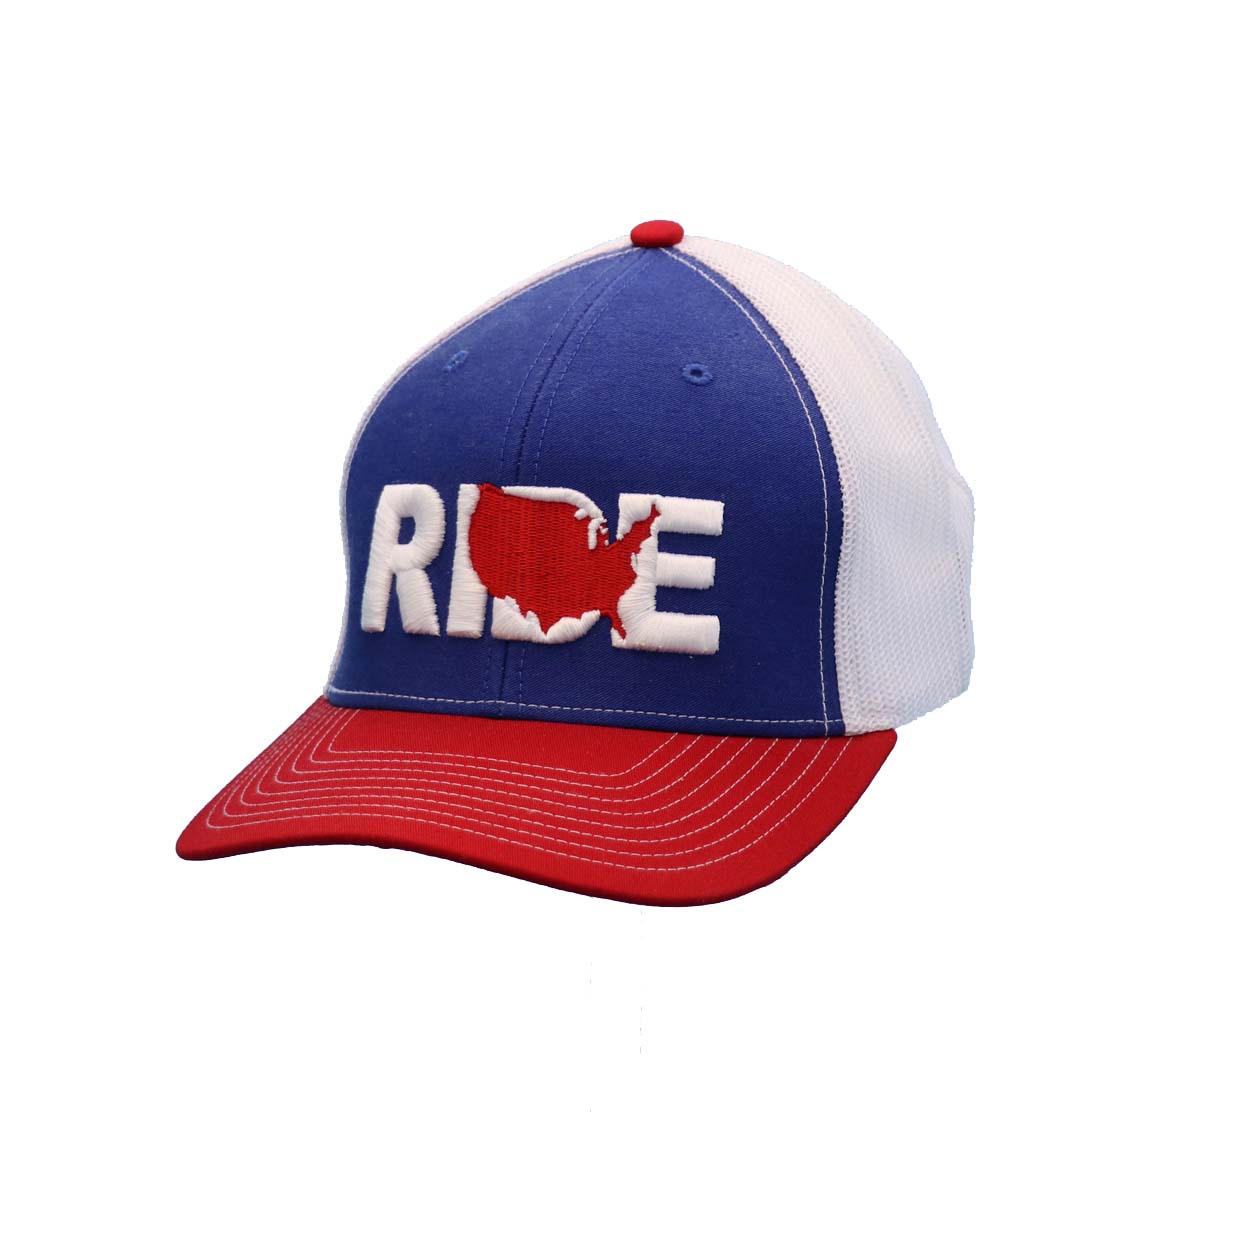 Ride United States Classic Embroidered Snapback Trucker Hat Blue/White/Red